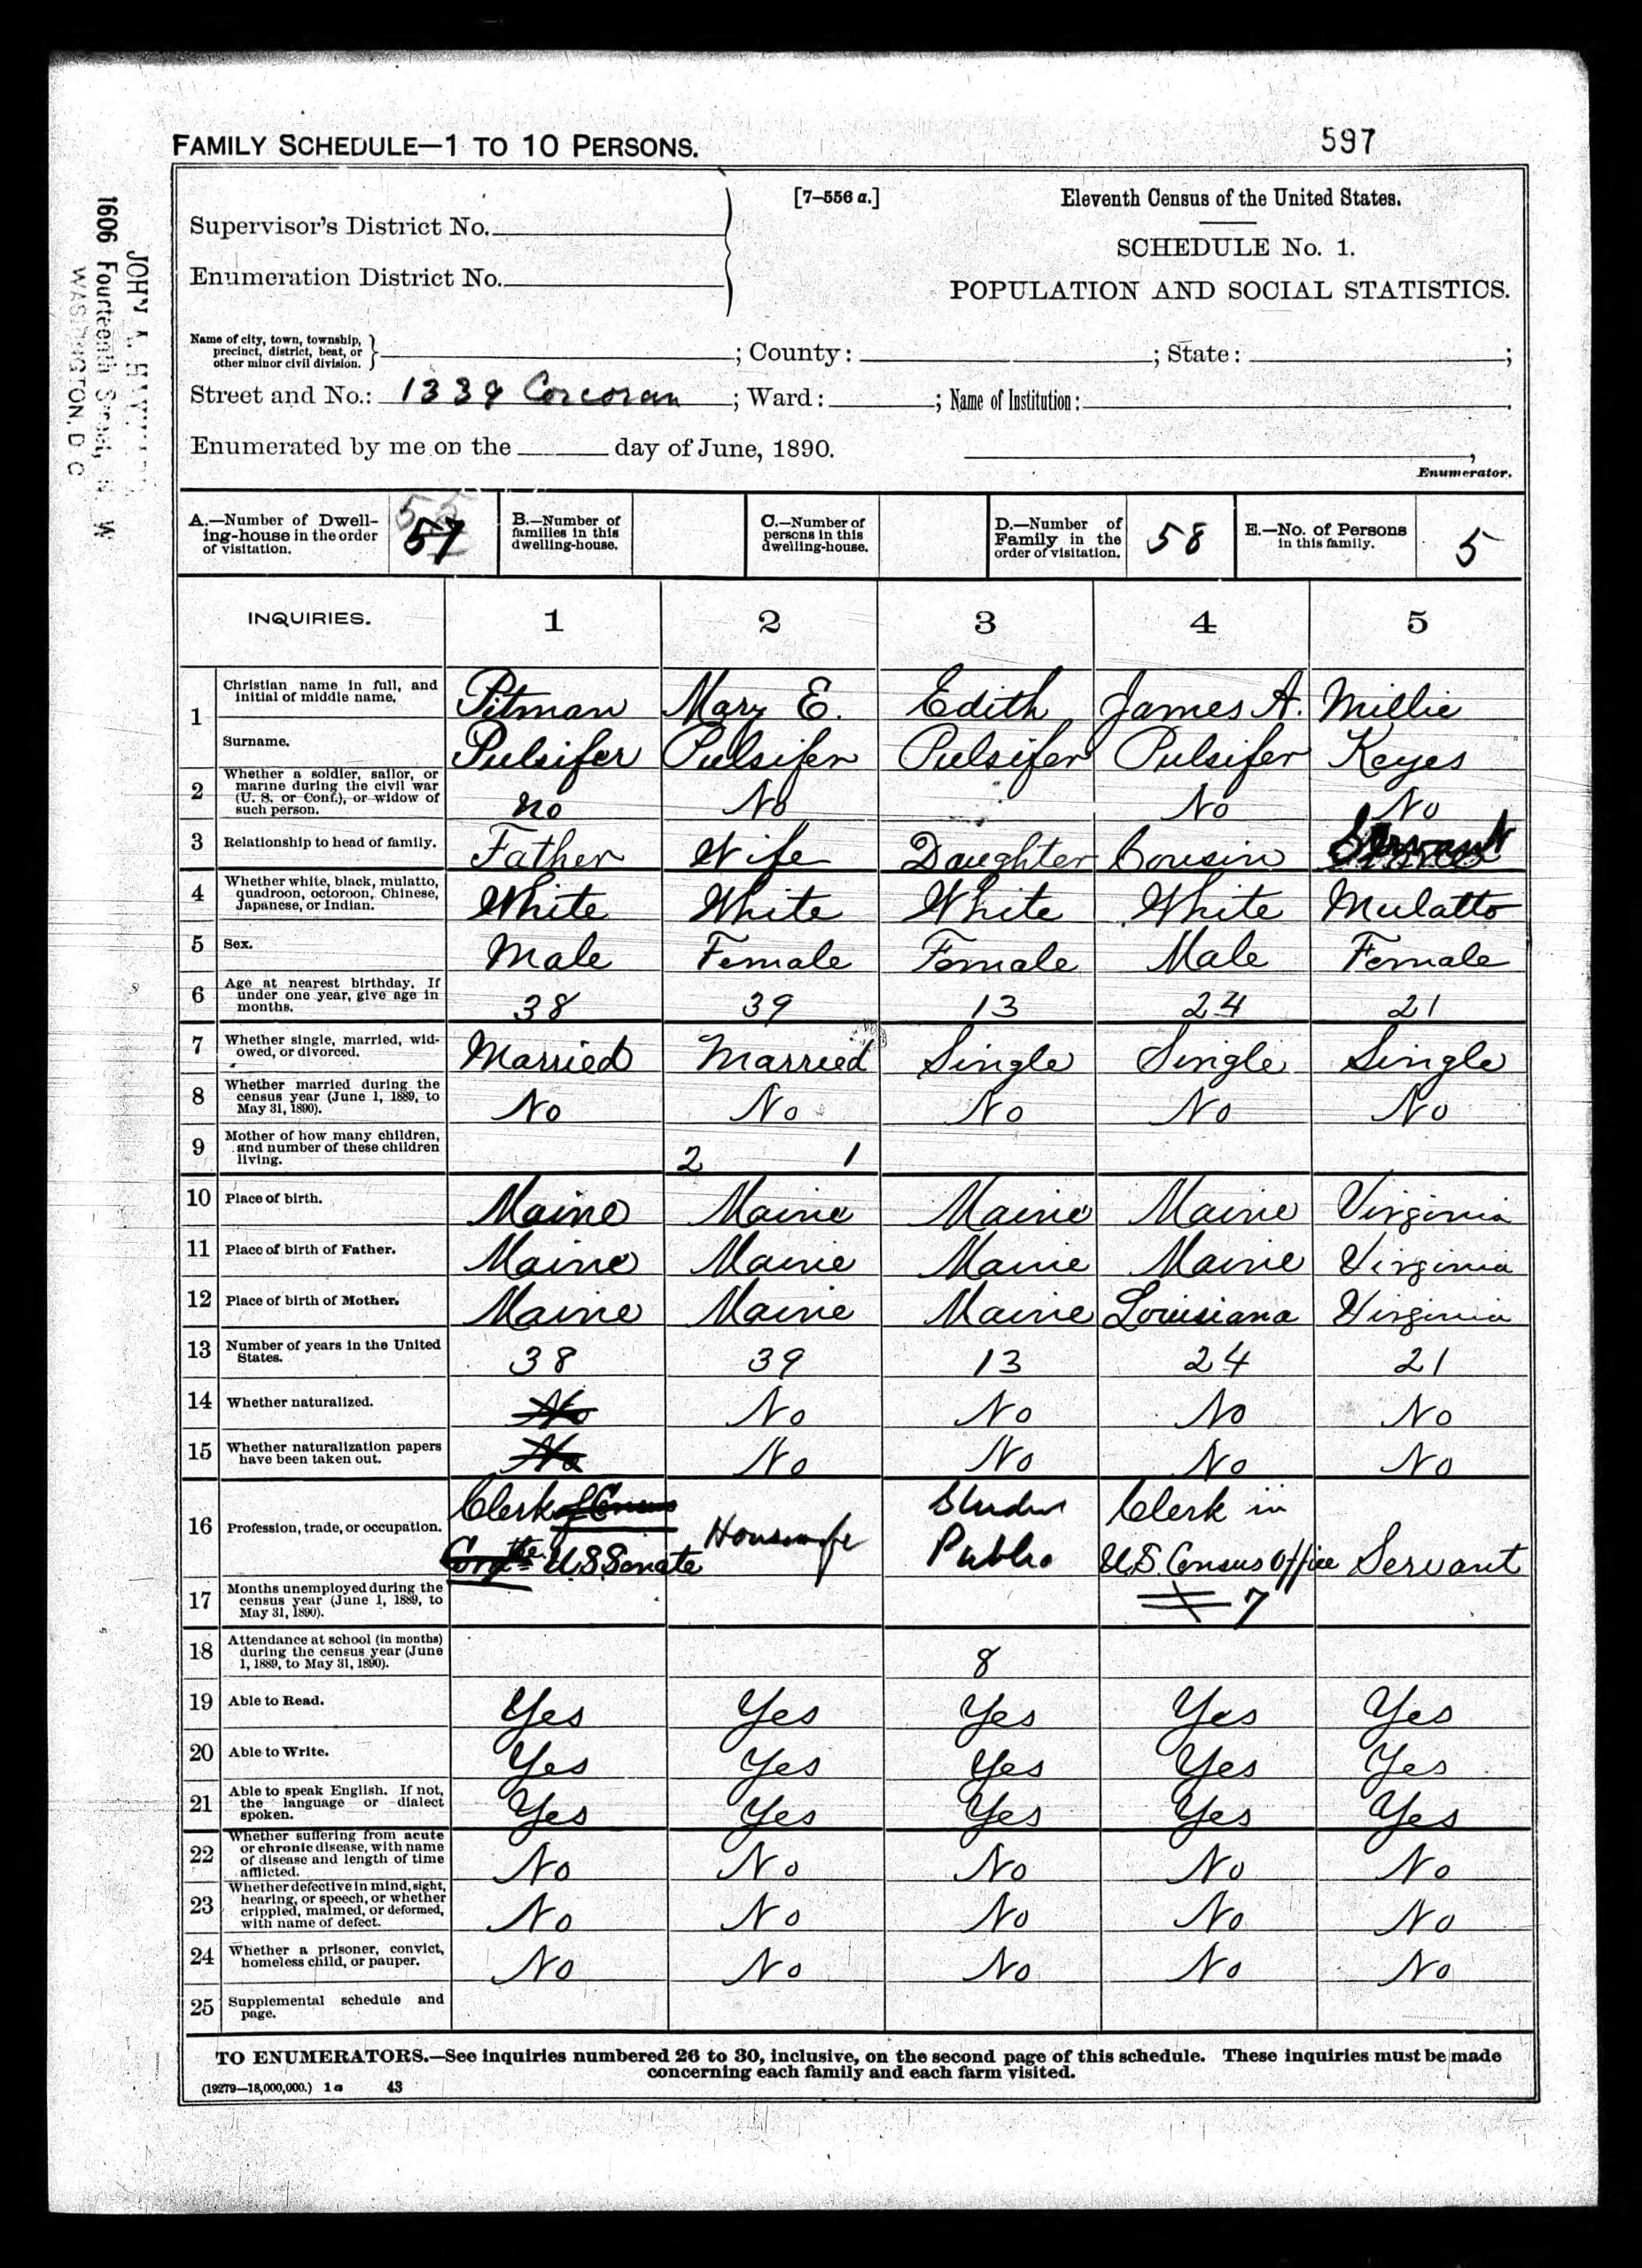 The Pulisfer family in the 1890 U.S. Census (Ancestry.com)